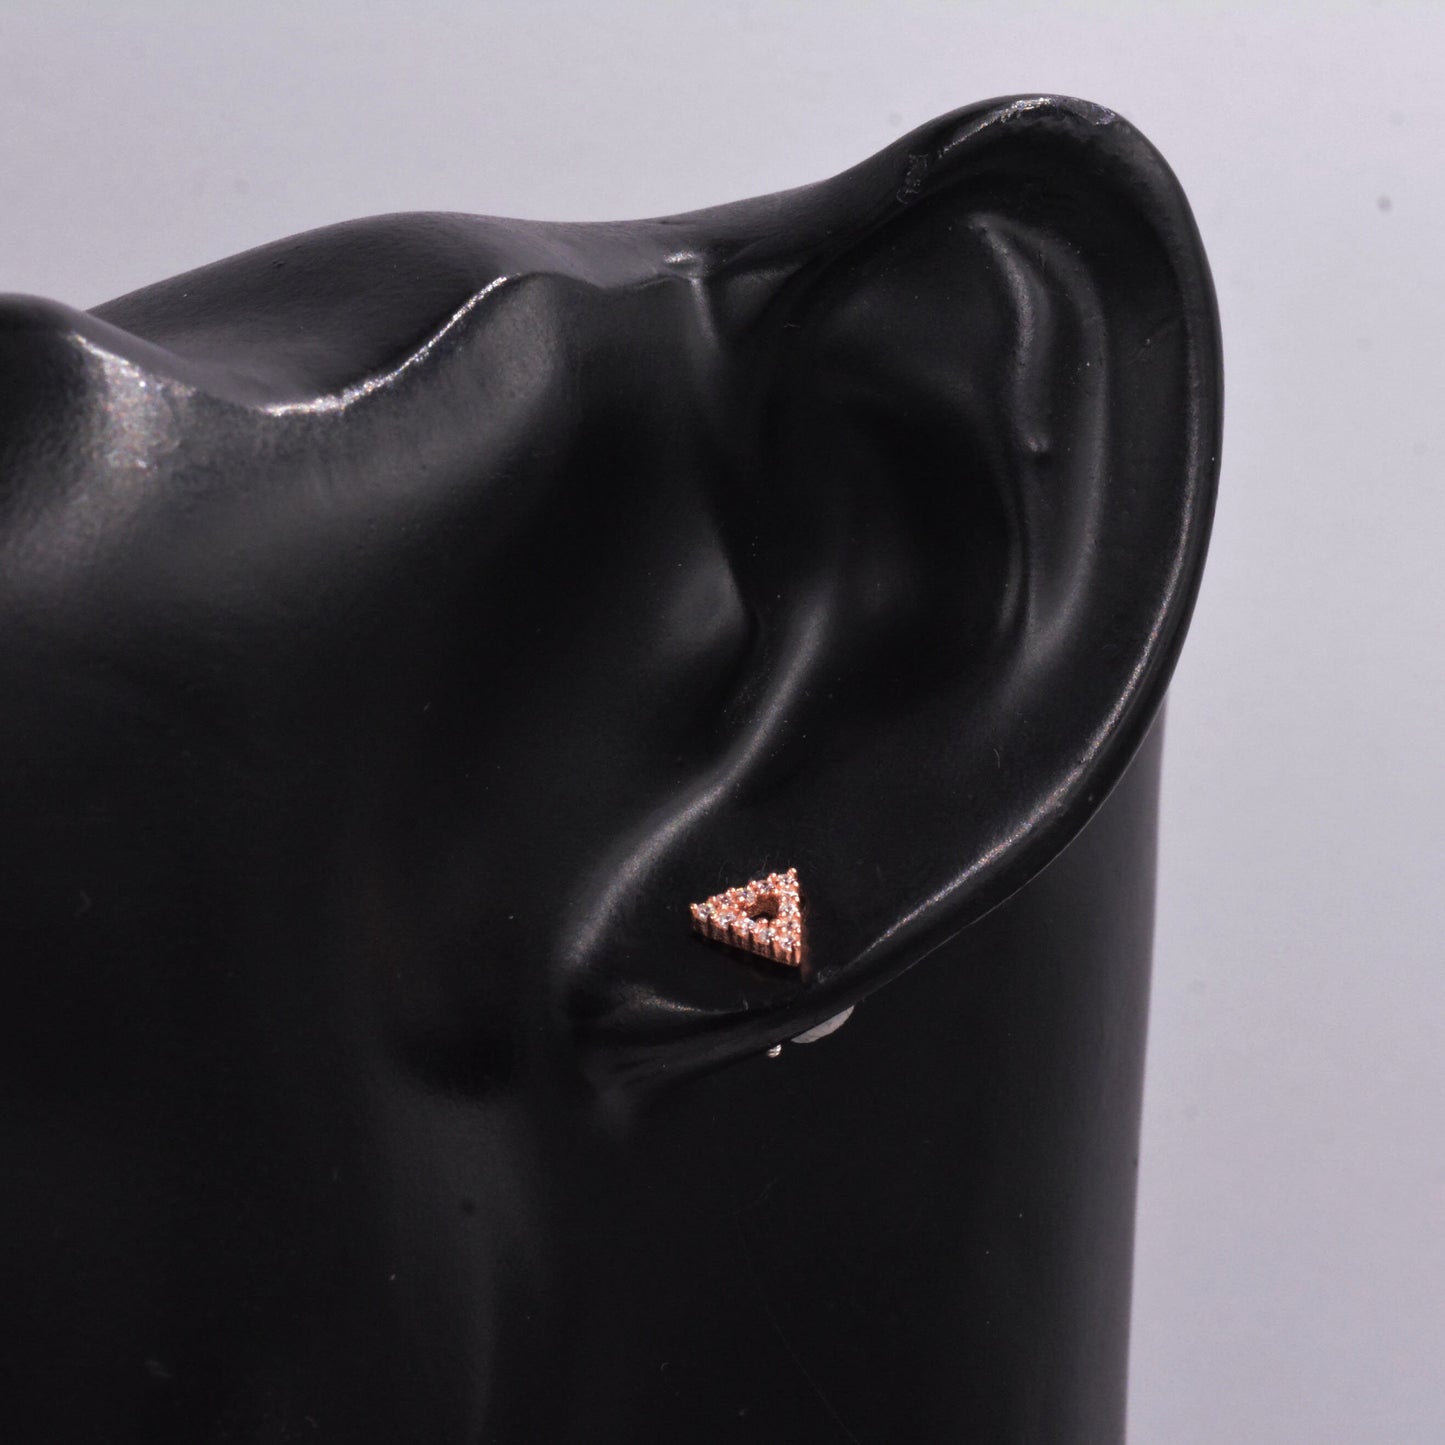 Small Pair of Open Triangle Stud Earrings in Sterling Silver, Rose Gold, Silver, Screw Back Earrings - helix, cartilage, conch, tragus